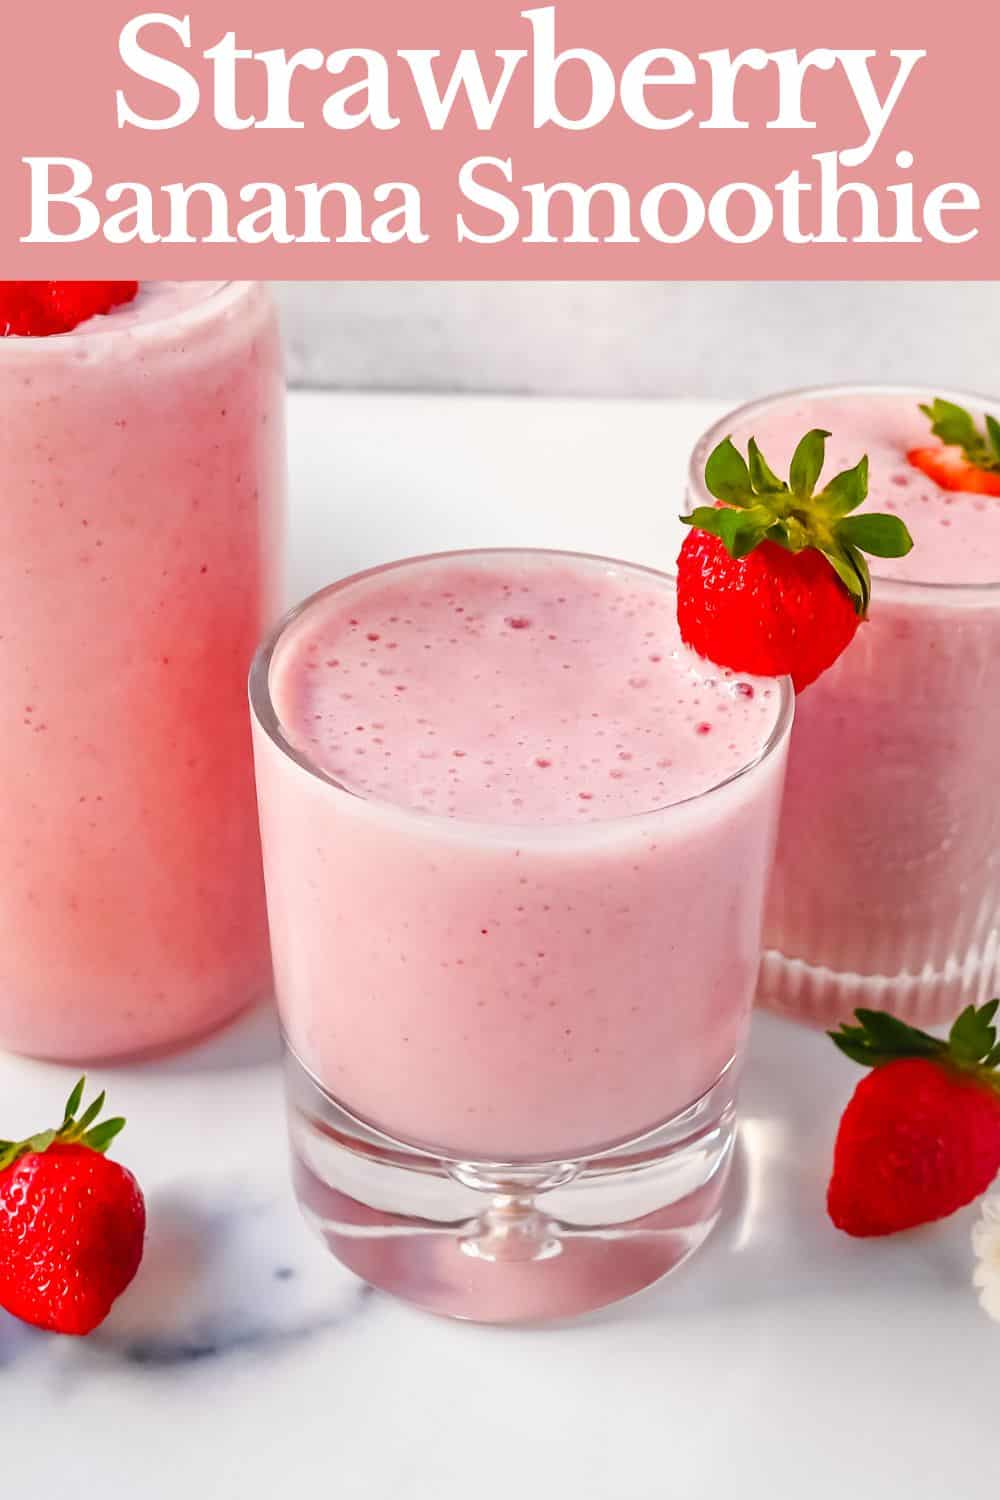 Strawberry Banana Smoothie Recipe. This easy, creamy, refreshing 4-ingredient Strawberry Banana Smoothie is made with strawberries, banana, milk, and a touch of honey and is such a healthy breakfast to start your day.